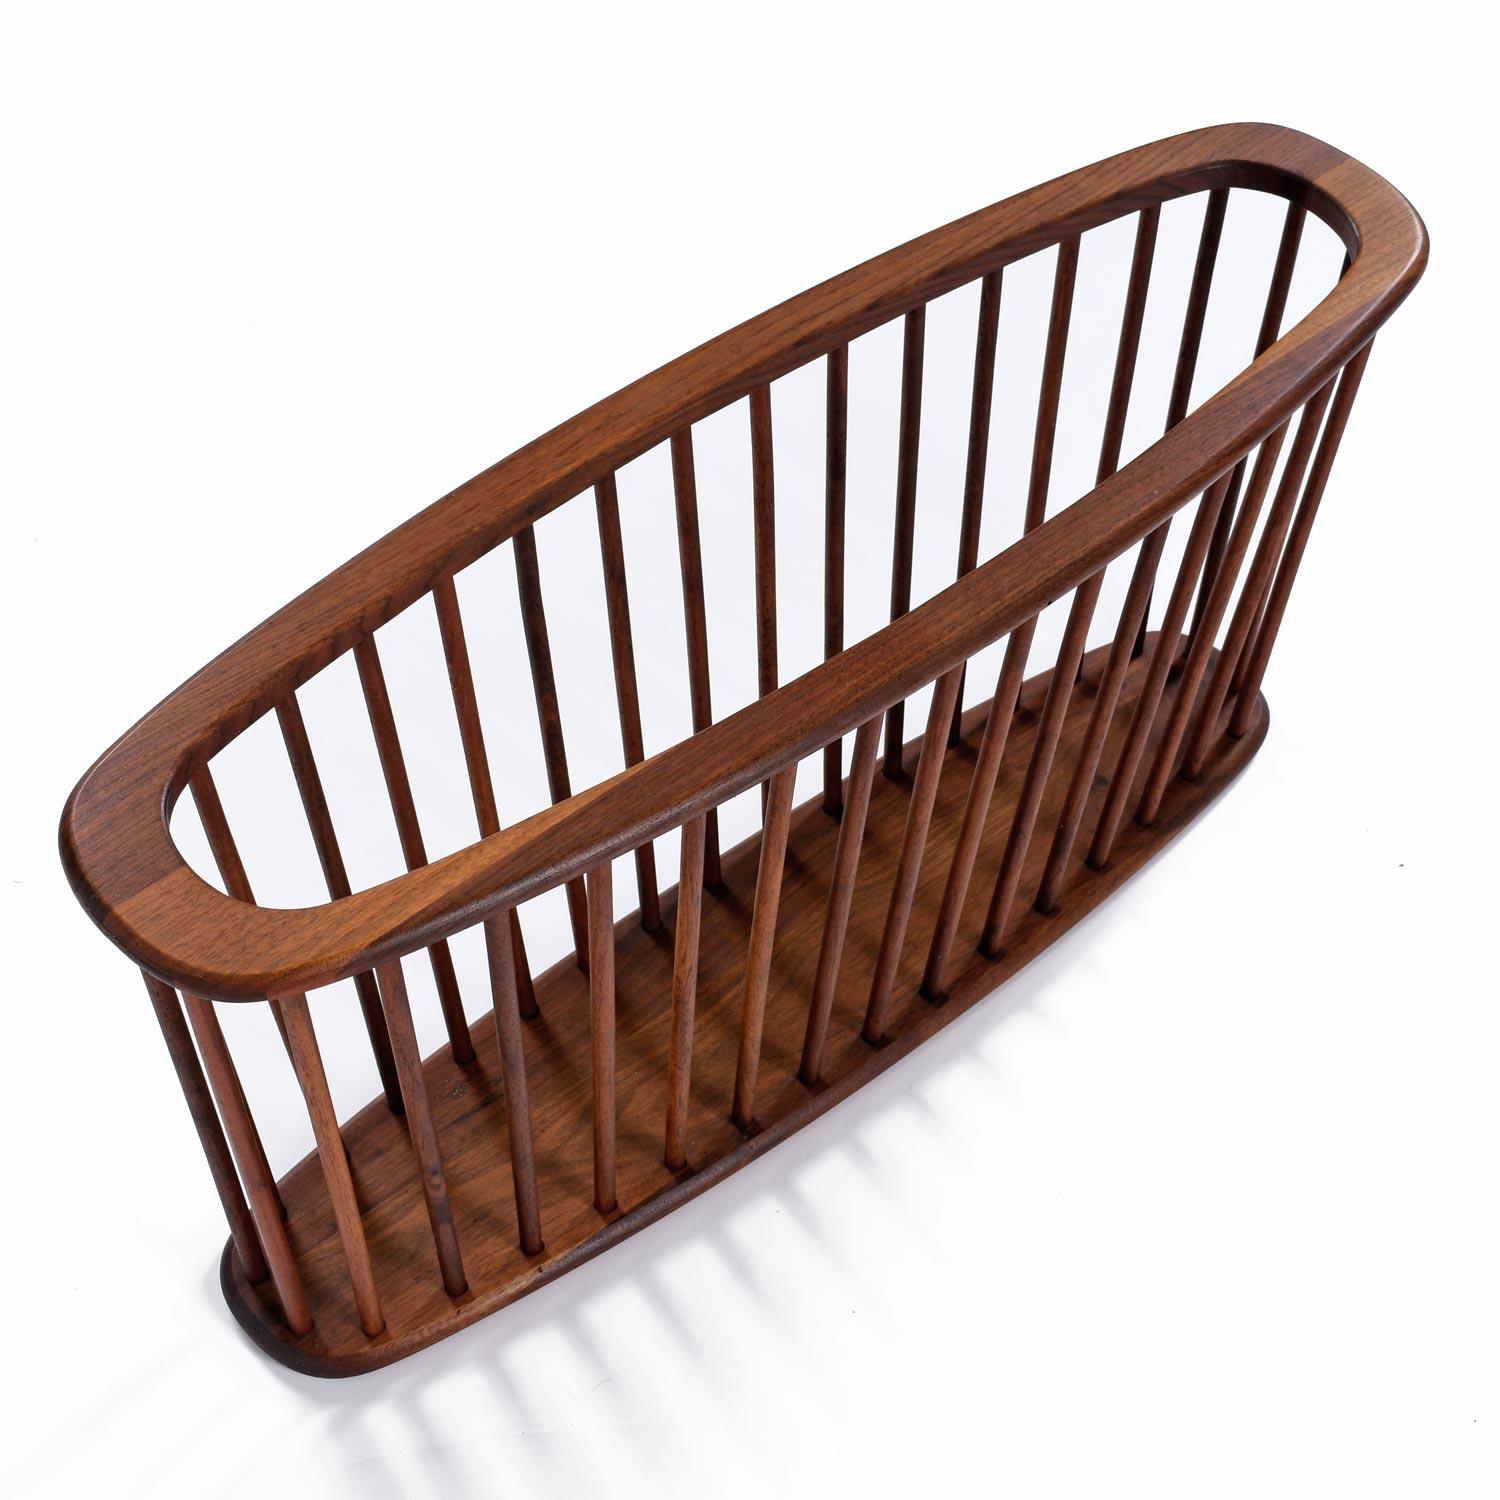 This handsome magazine rack by Arthur Umanoff is the 